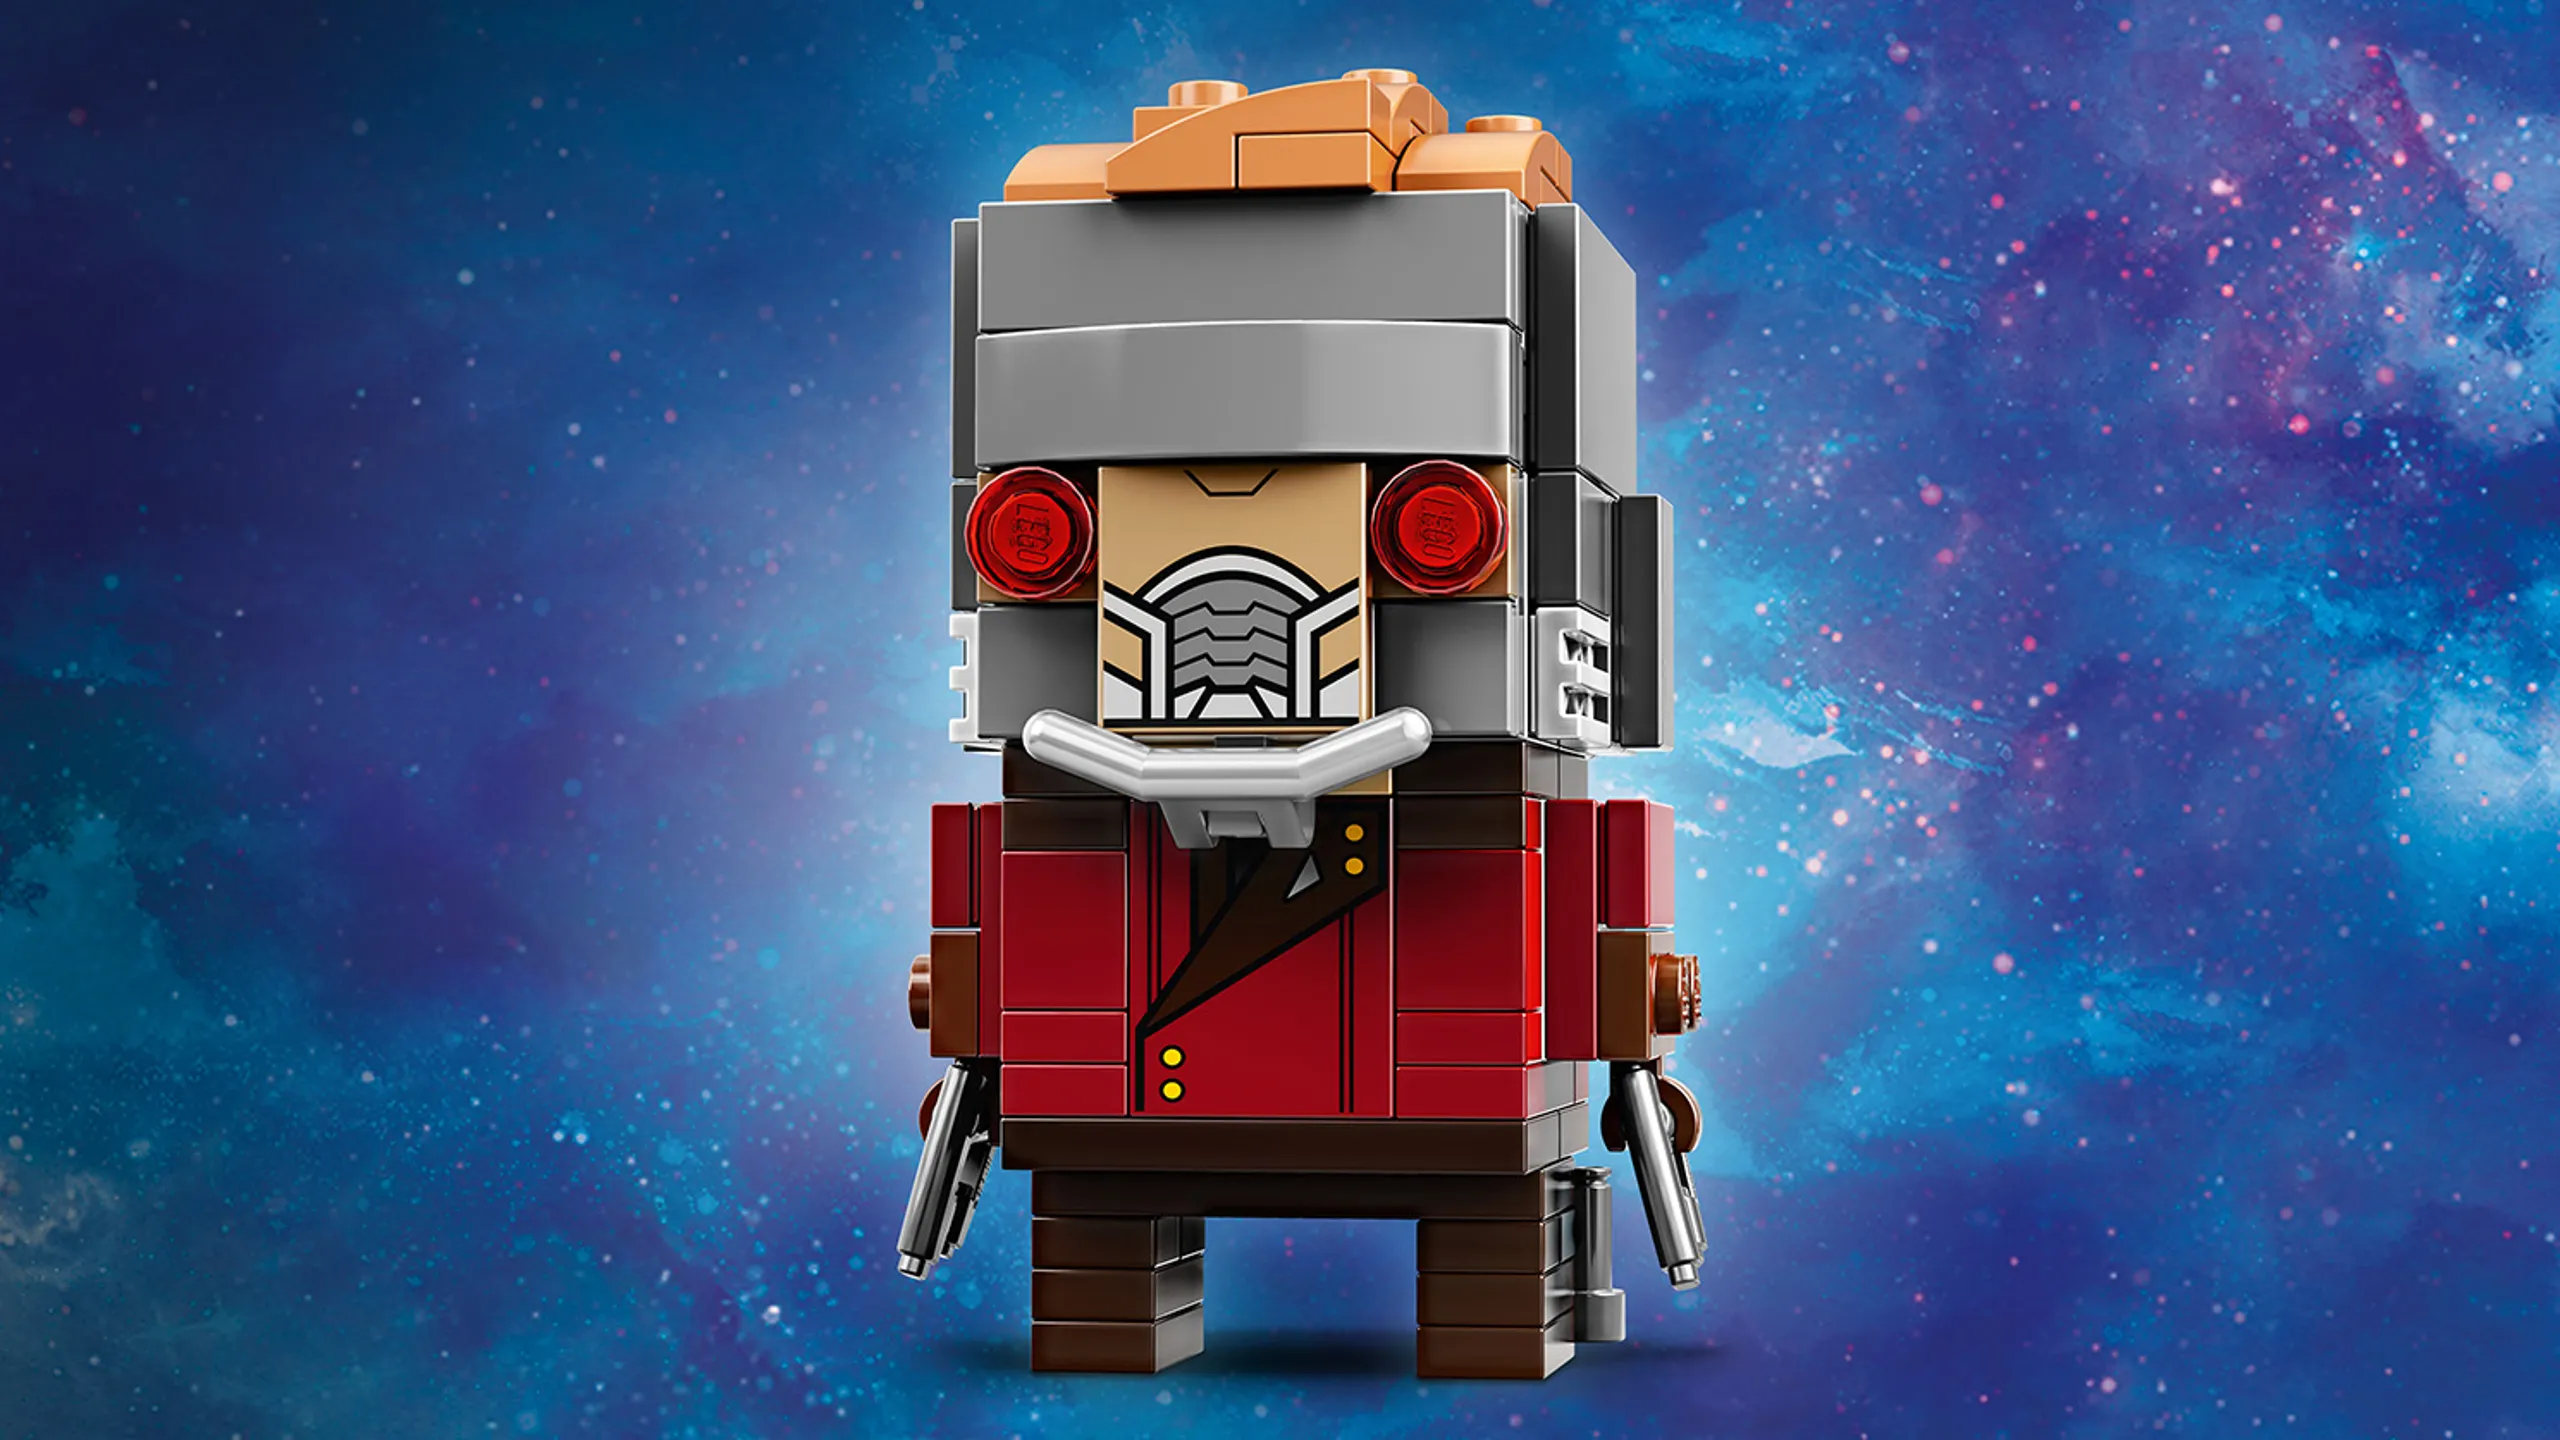 LEGO Brickheadz - 41606 Star-Lord - Build a LEGO Brickheadz figure of Star-Lord from the Avengers: Infinity War movie. Check out his golden hair,  battle helmet and boot rockets.